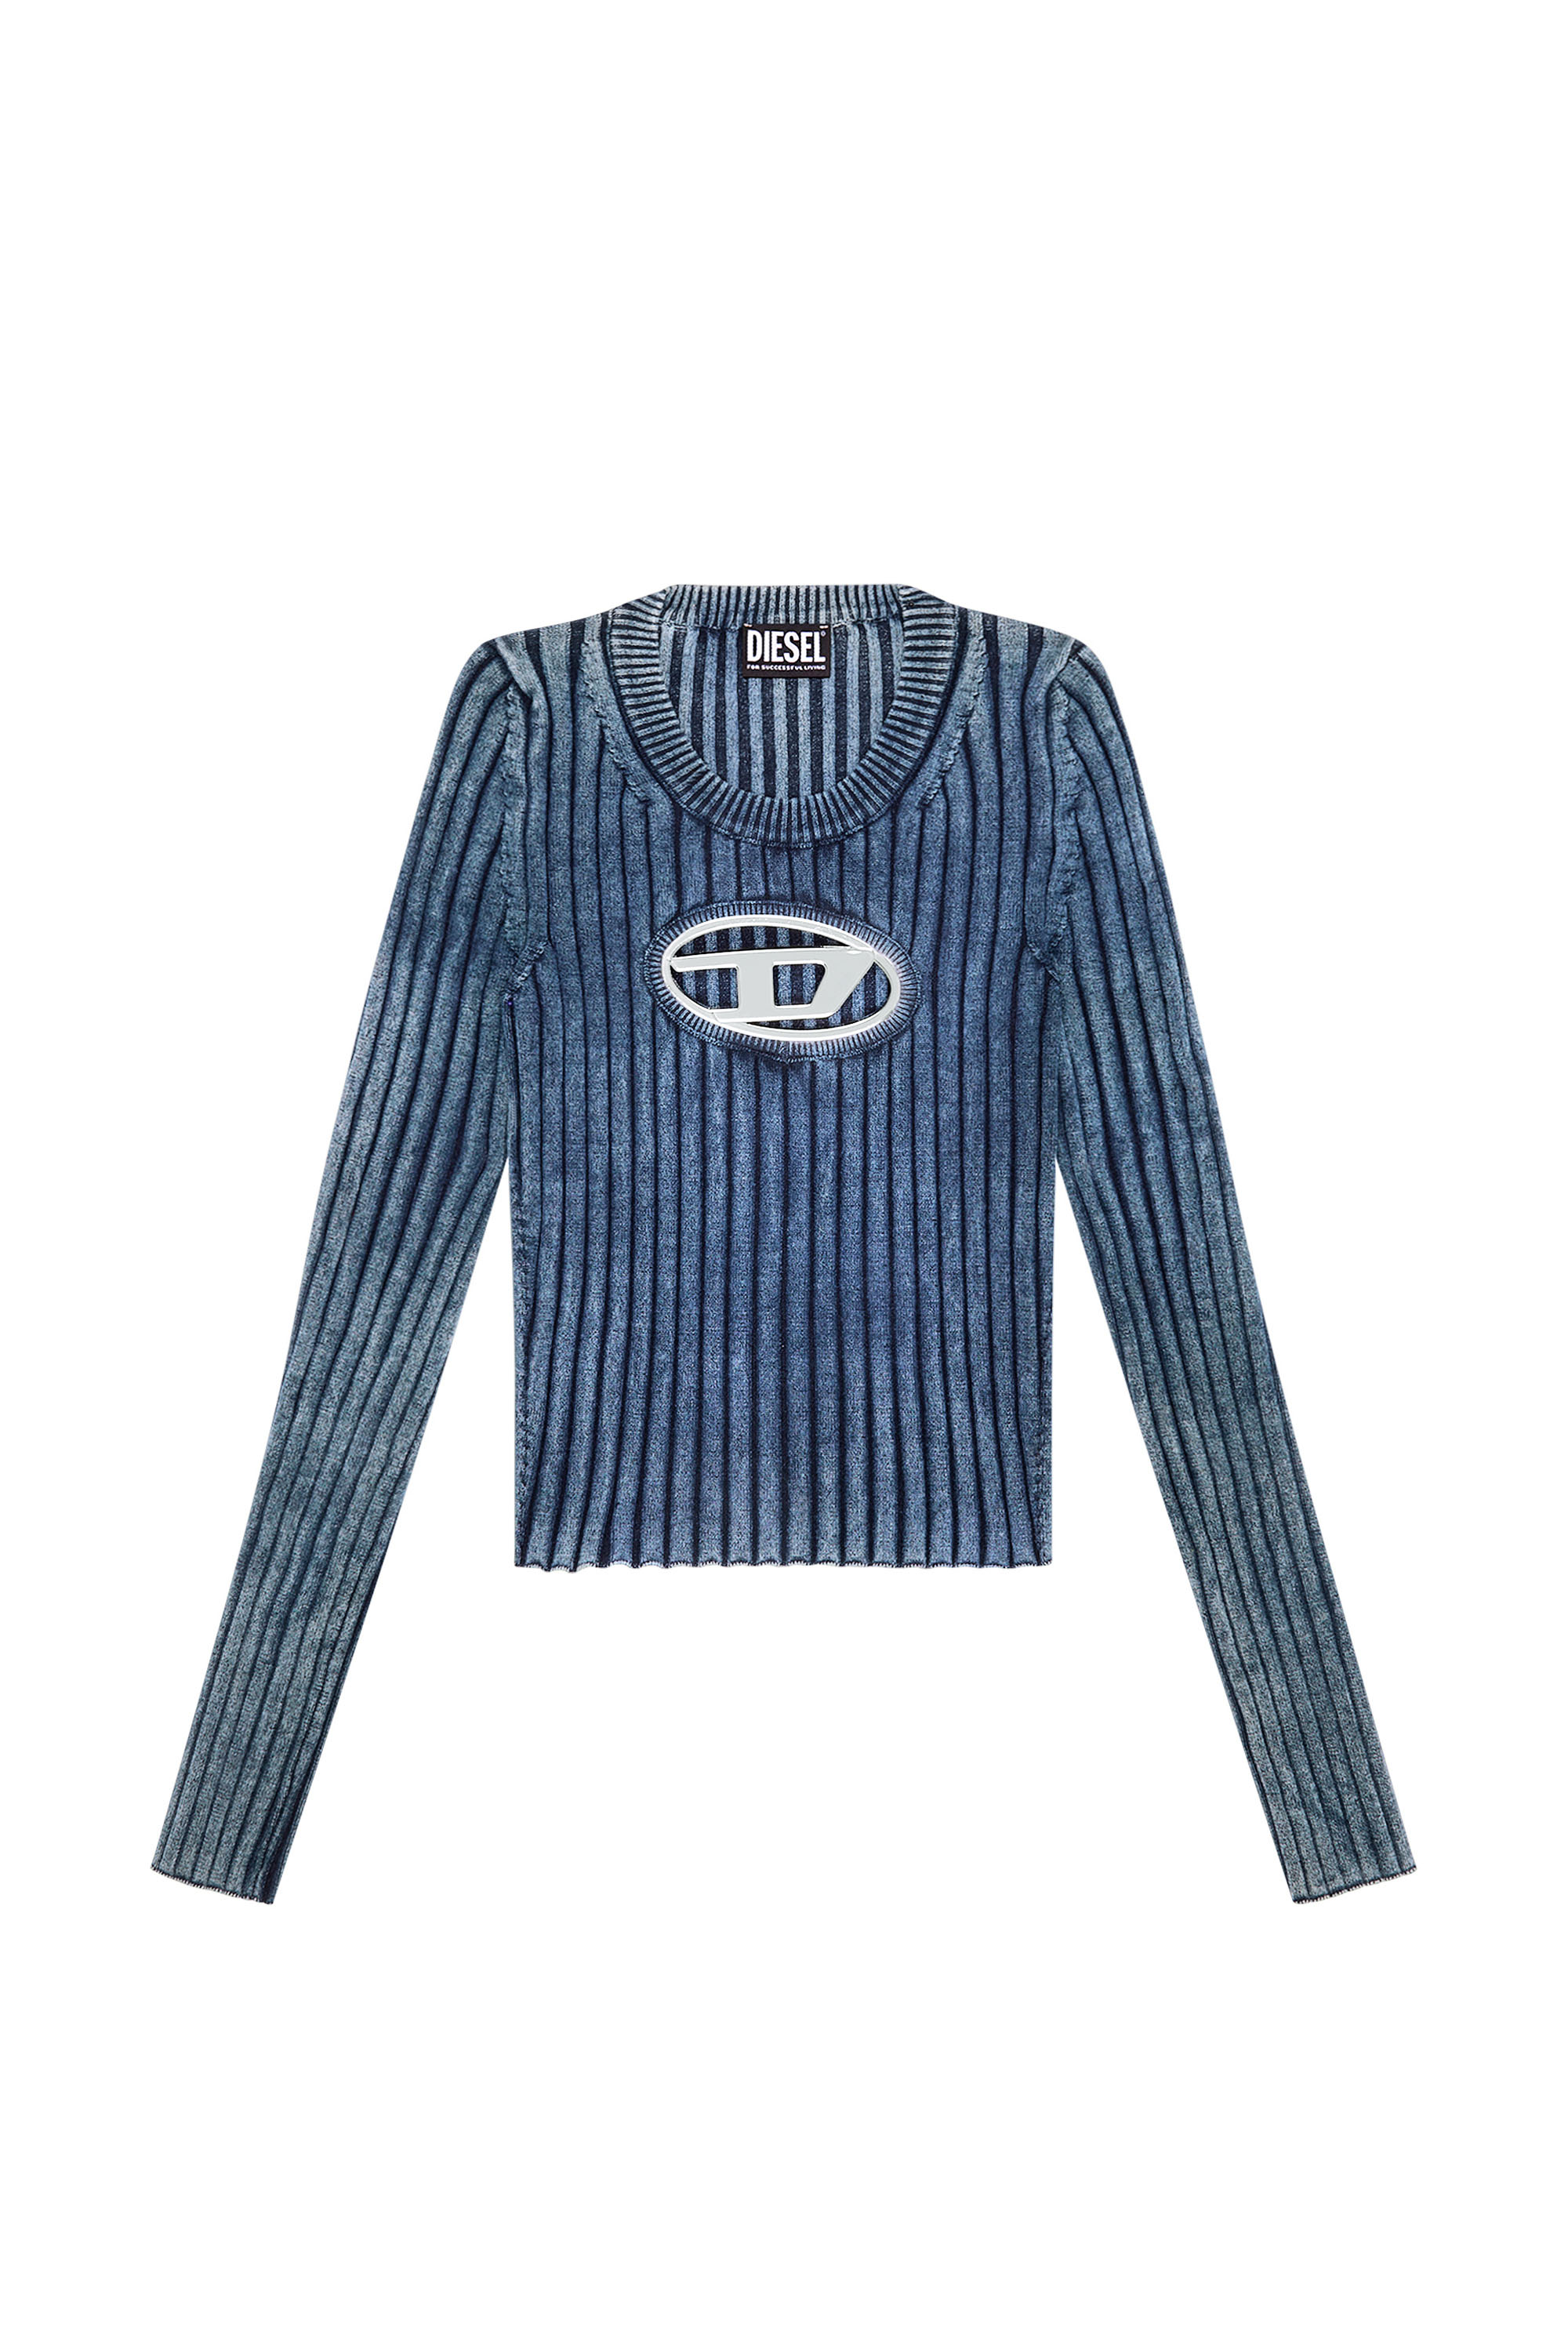 Diesel - M-ANCHOR, Woman Bouclé pullover in Blue - Image 3